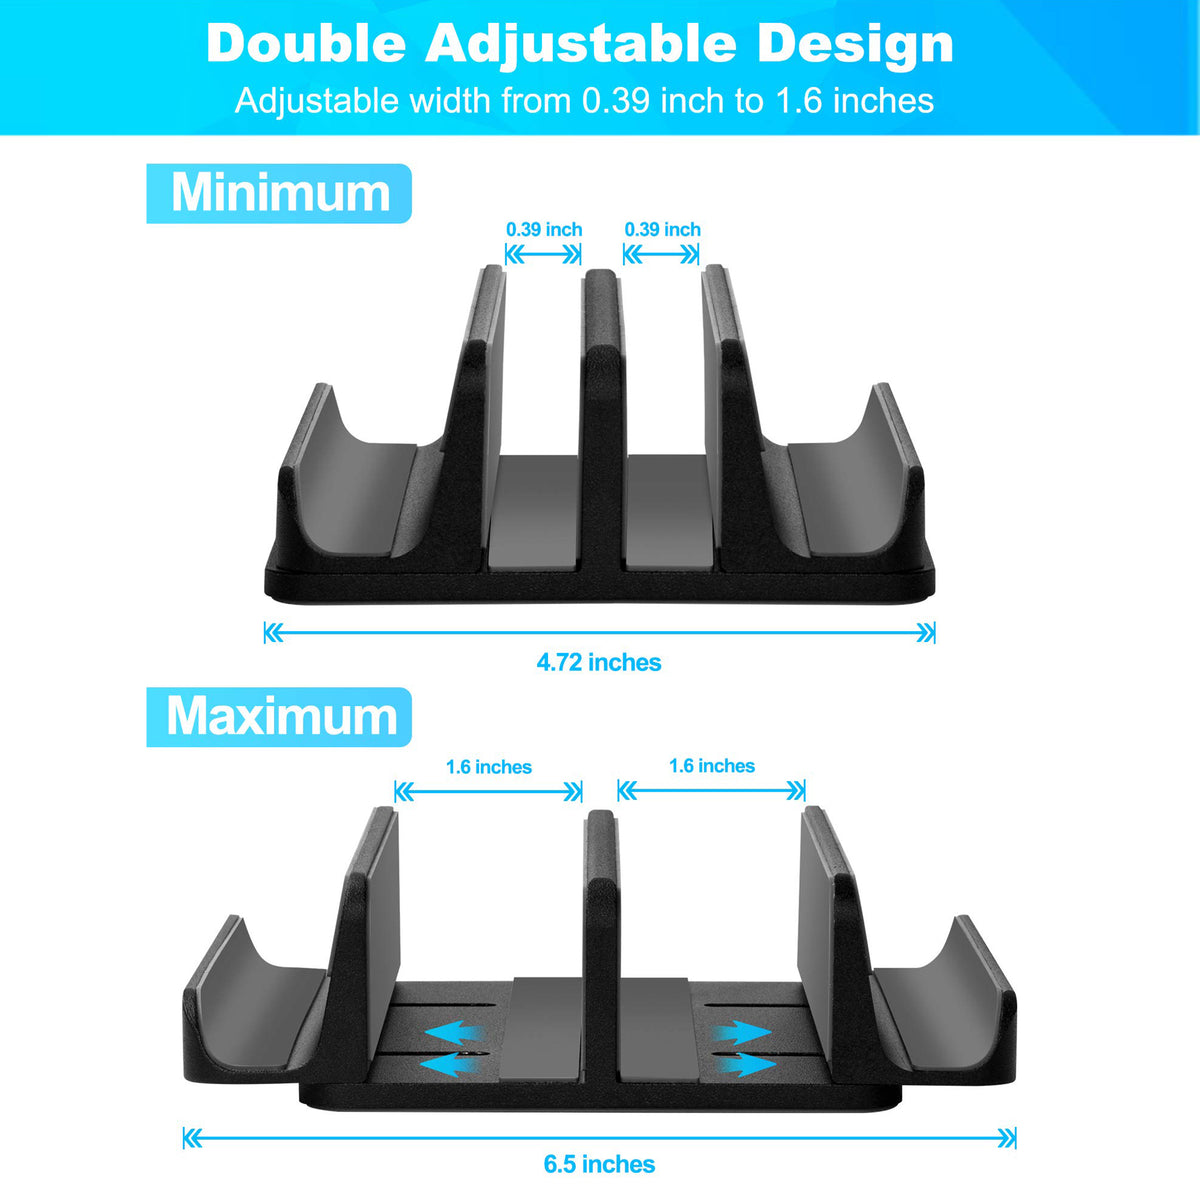 JARLINK 4-in-1 Adjustable Vertical Laptop Stand Holder, Aluminum Dual Slots Laptop Rack for Desk, Space-Saving Organizer for All MacBook, Surface, Chromebook, and Gaming Laptops